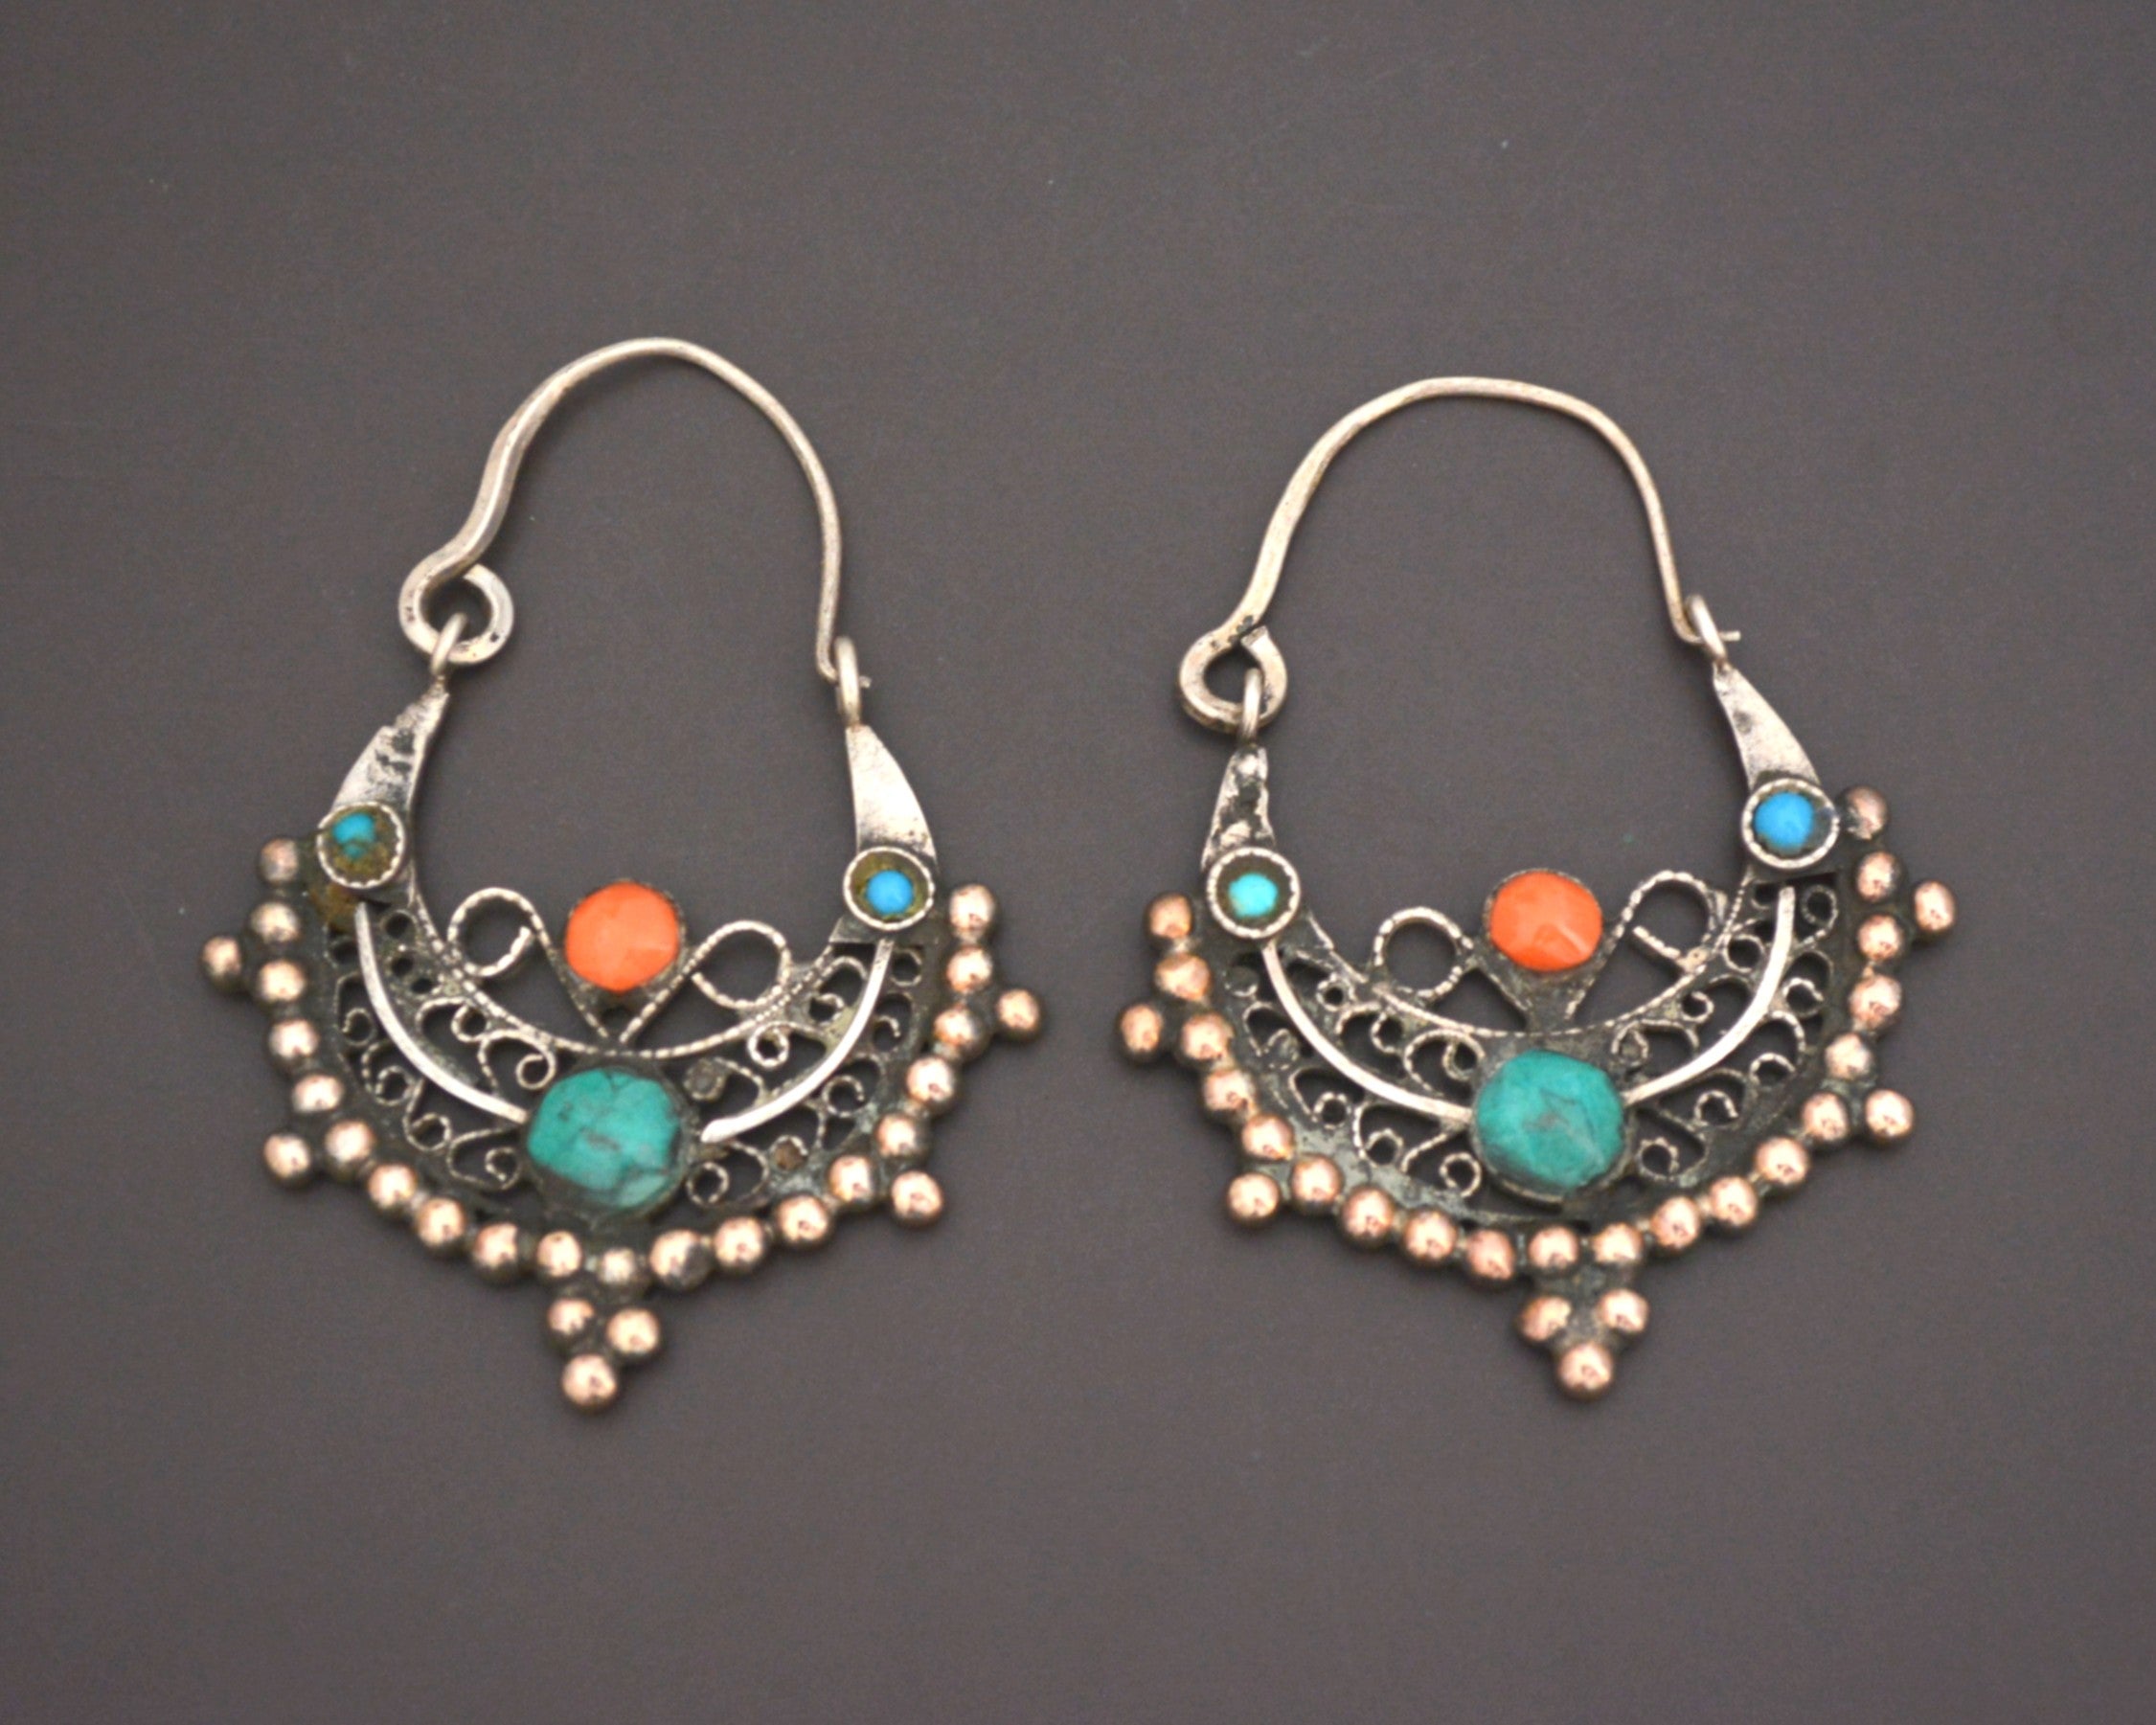 Afghani Hoop Earrings with Turquoise and Coral